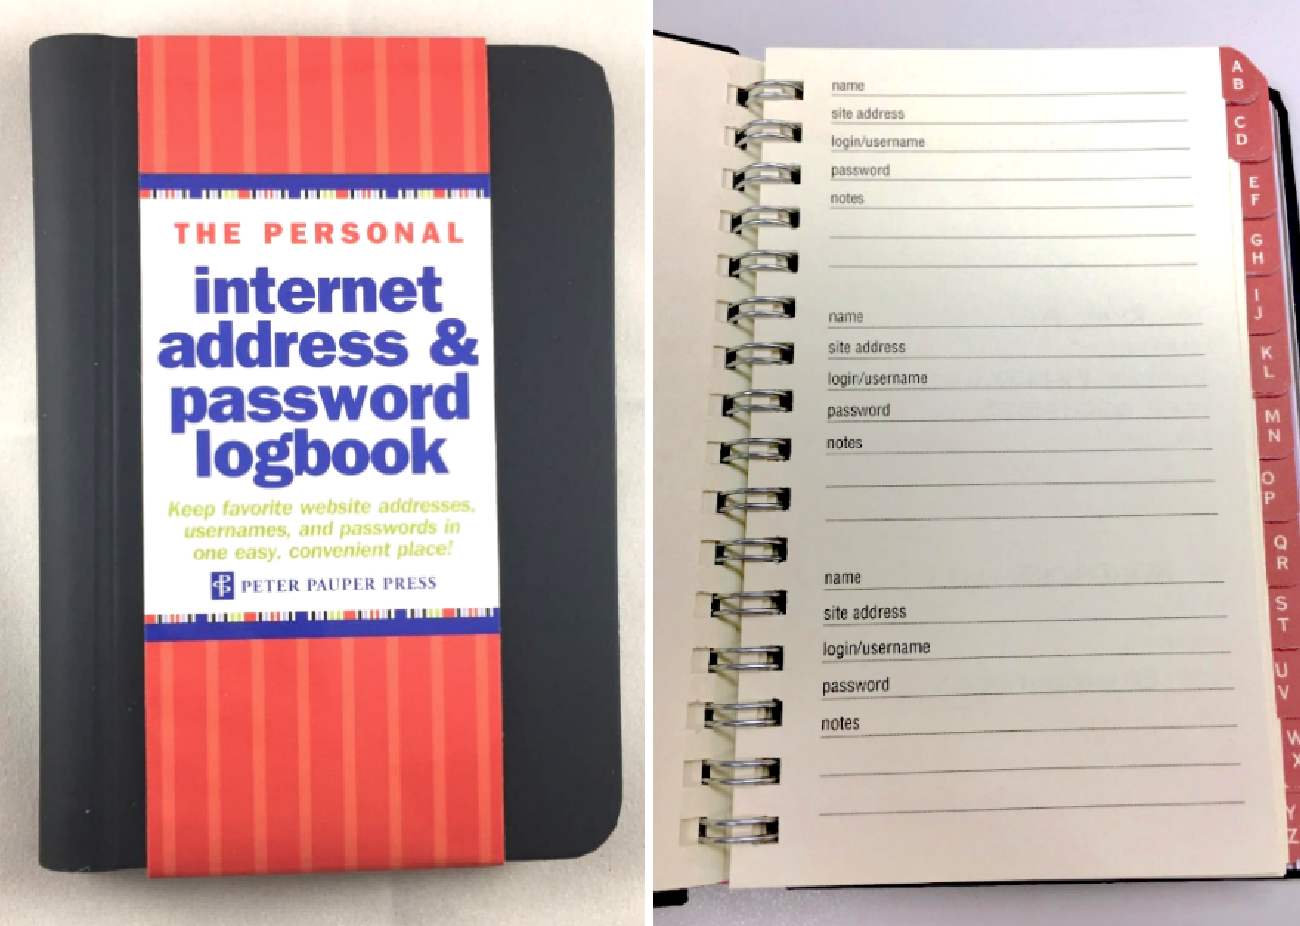 Two reviewer photos showing the cover and inside of the book. The inside has space for website, login/username, password, and notes.